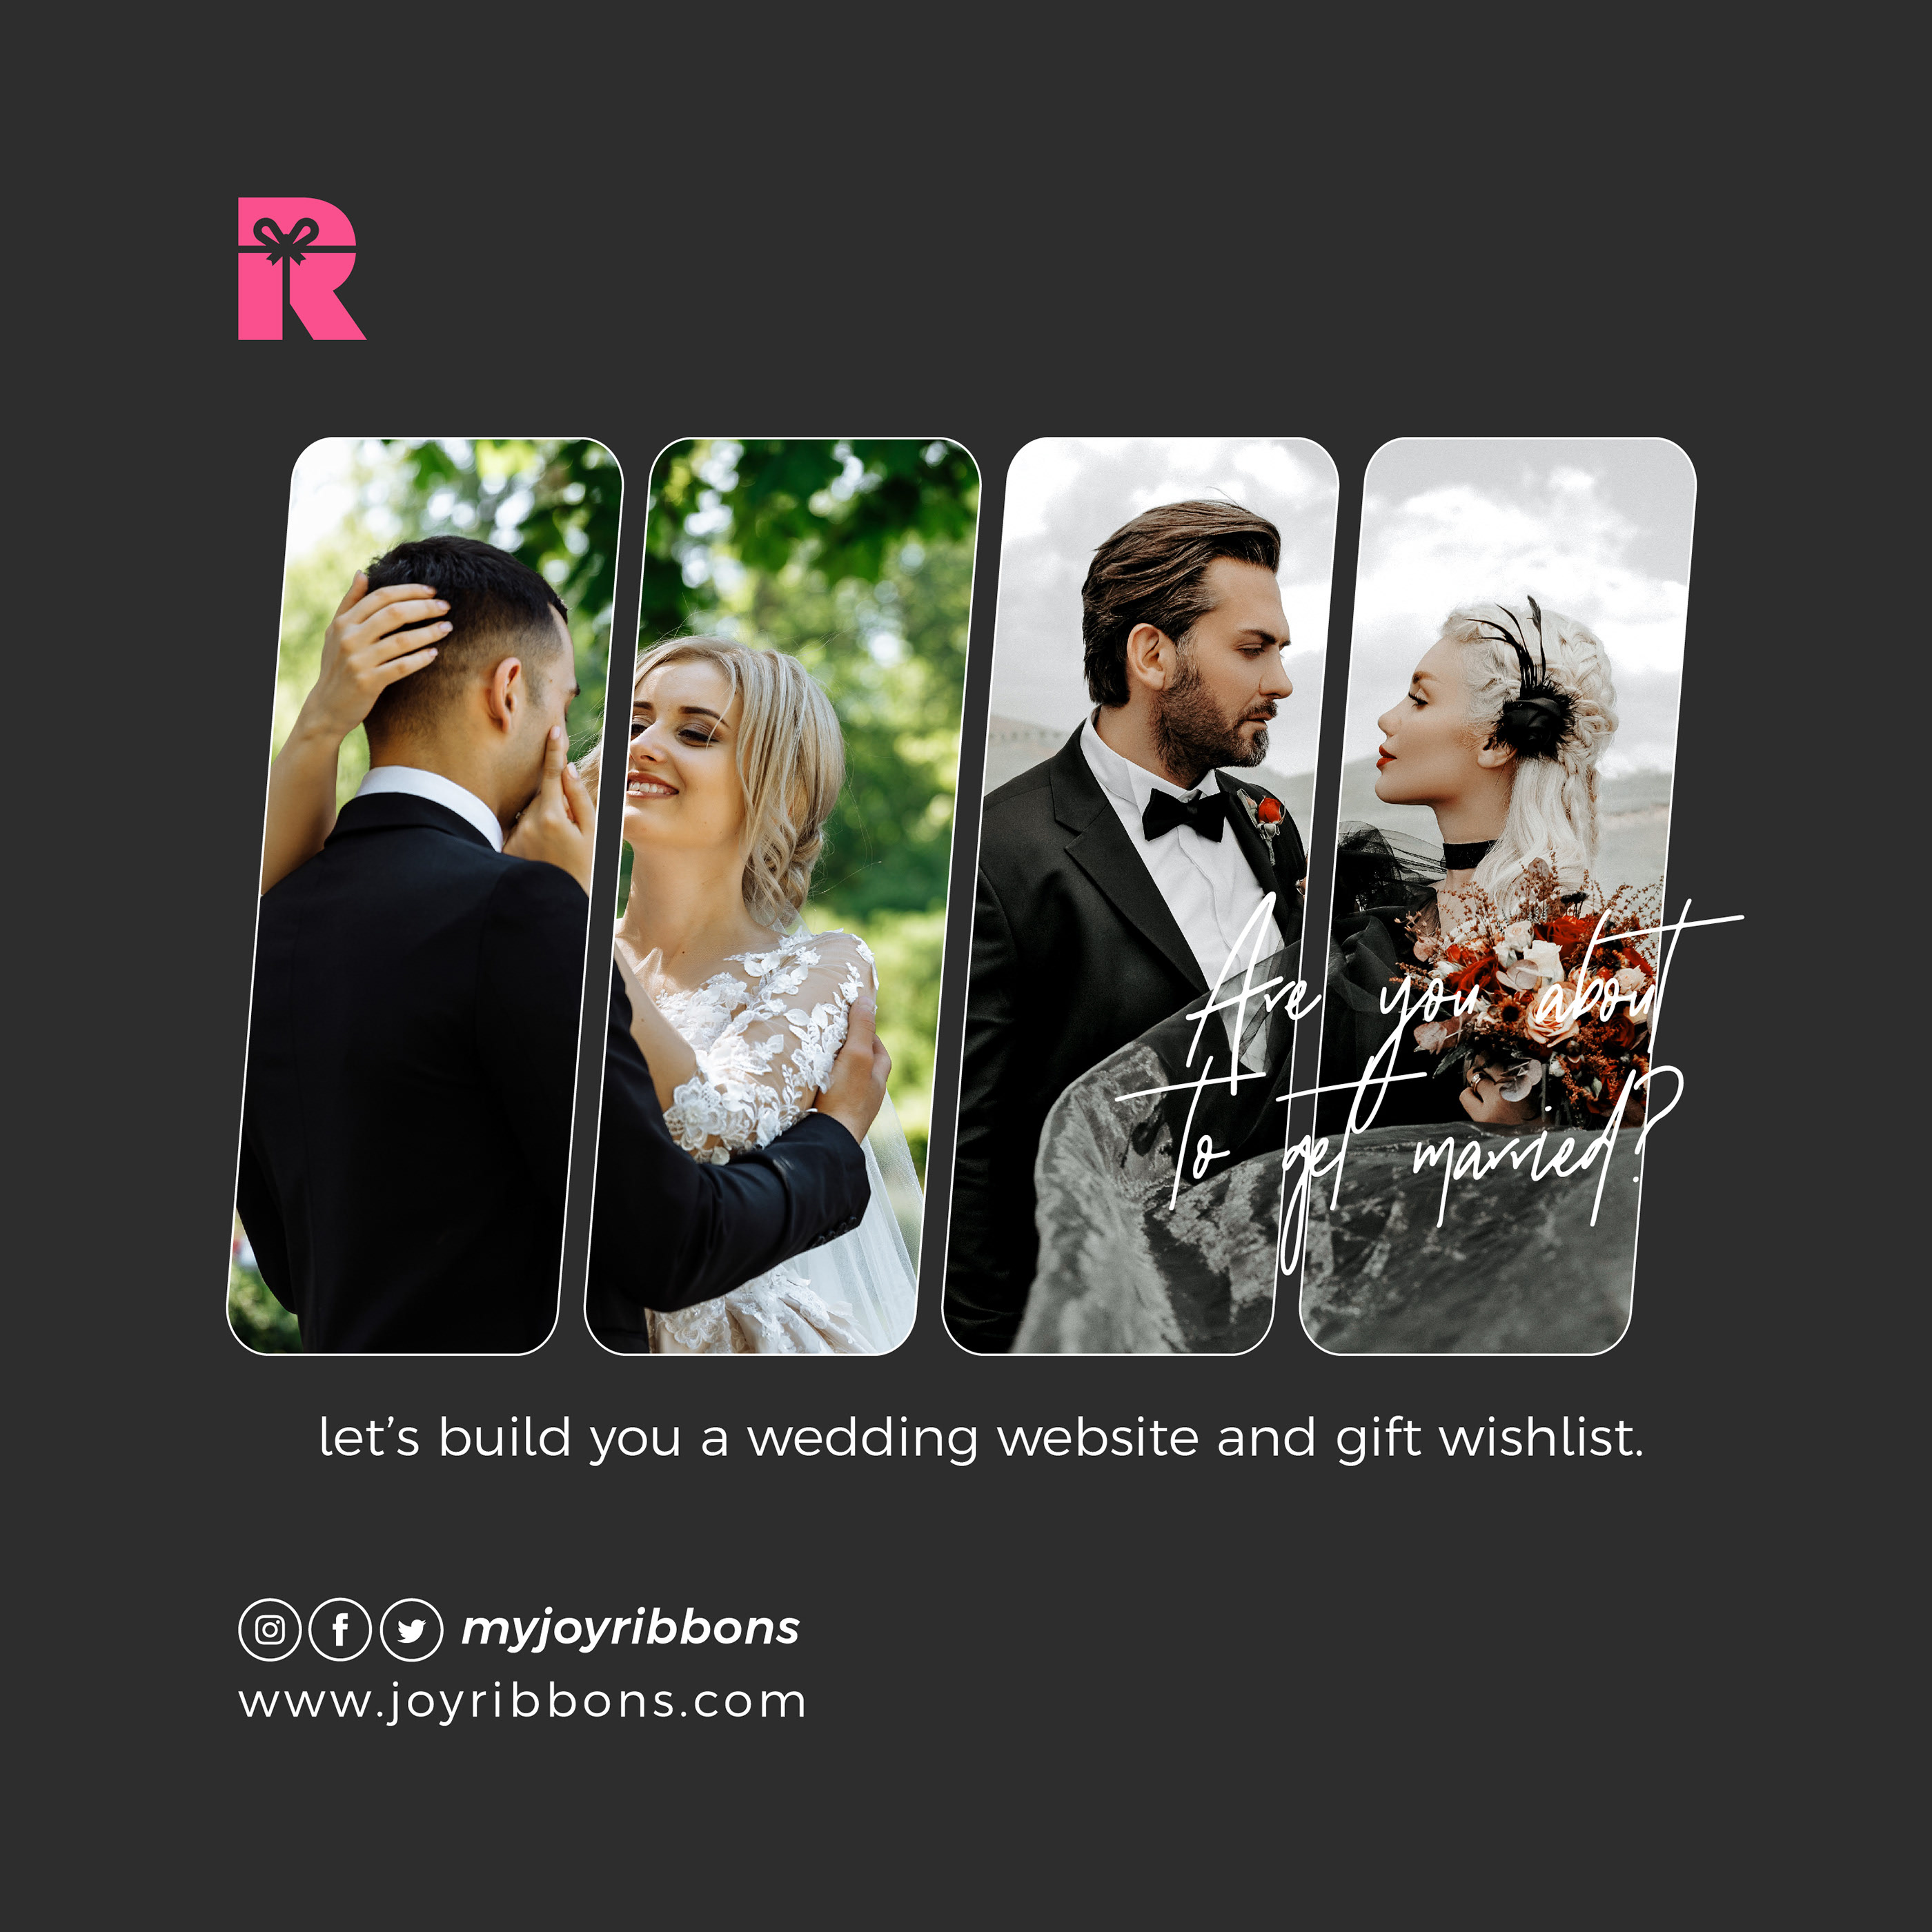 are you getting married soon? use www.joyribbons.com for your wedding registry - JoyRibbons Blog